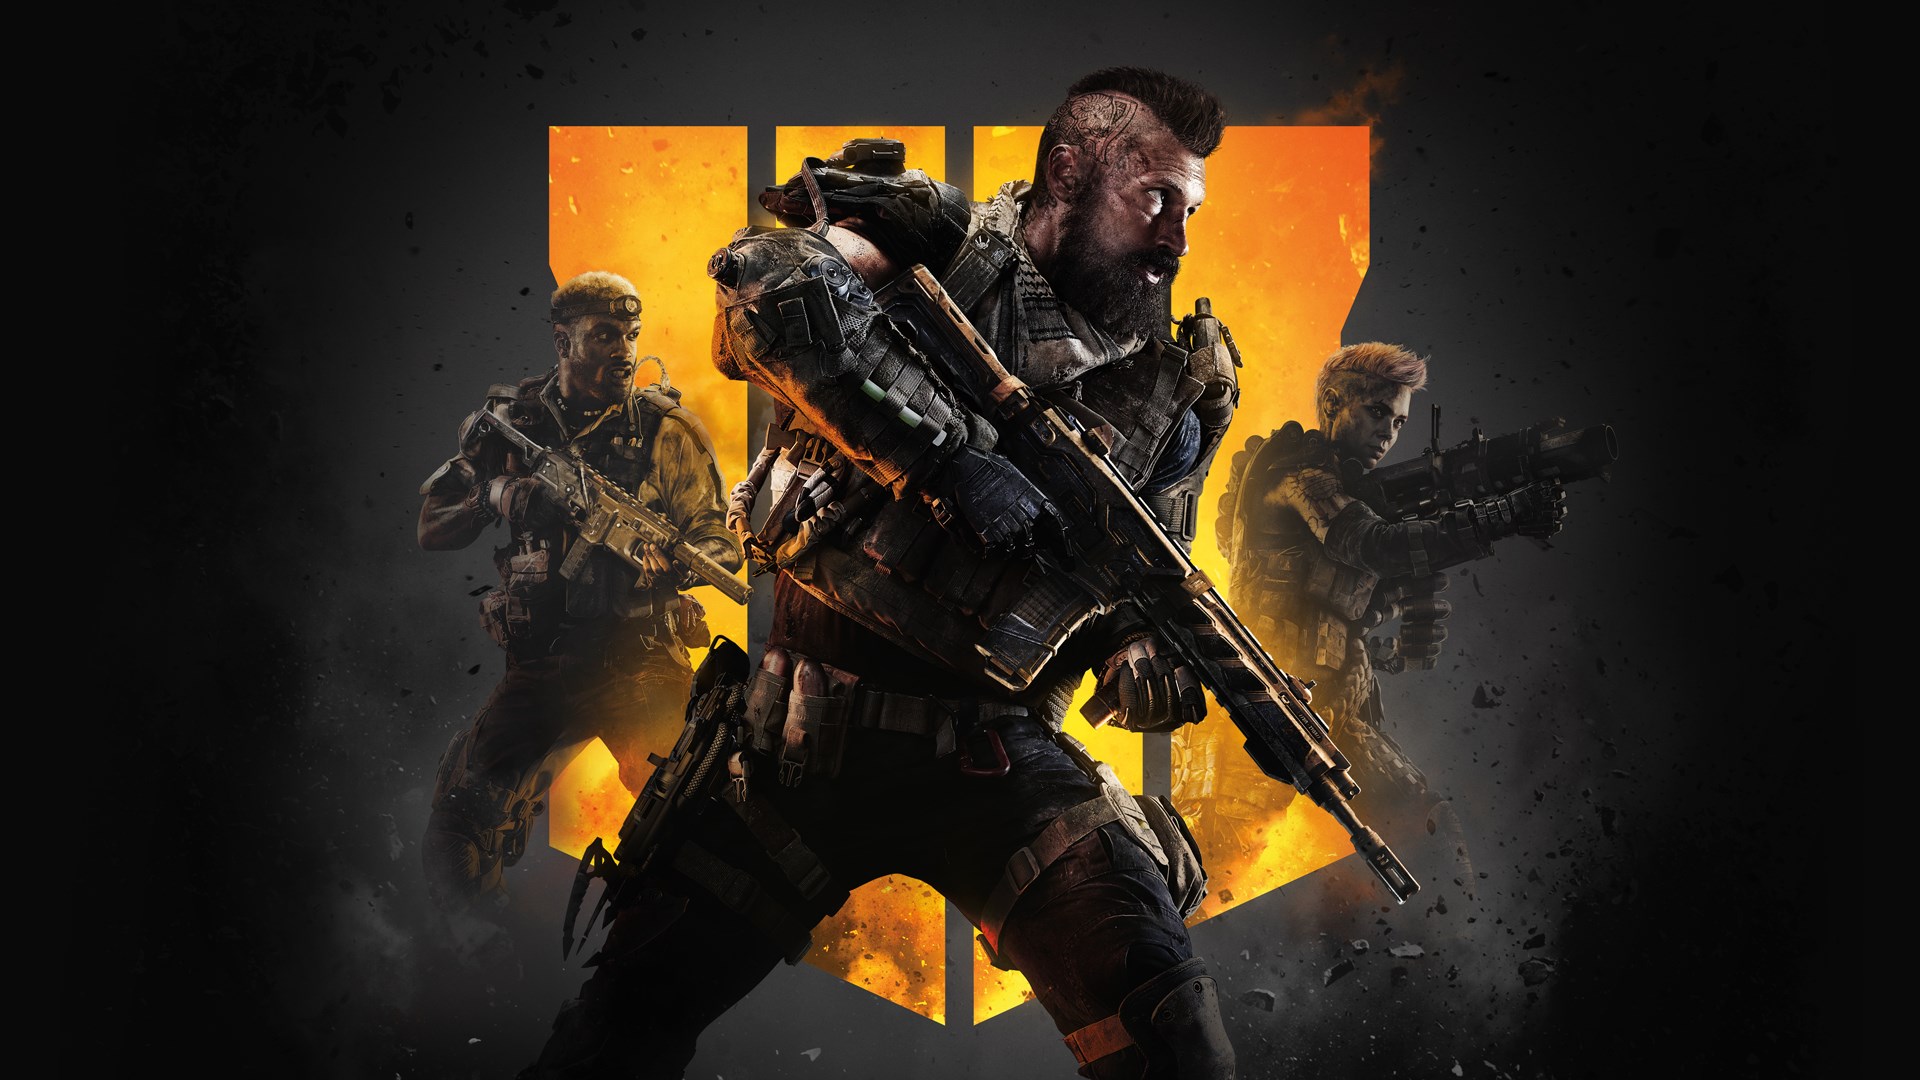 Call of duty black ops 4 ps4 trade in value Buy Call Of Duty Black Ops 4 Microsoft Store